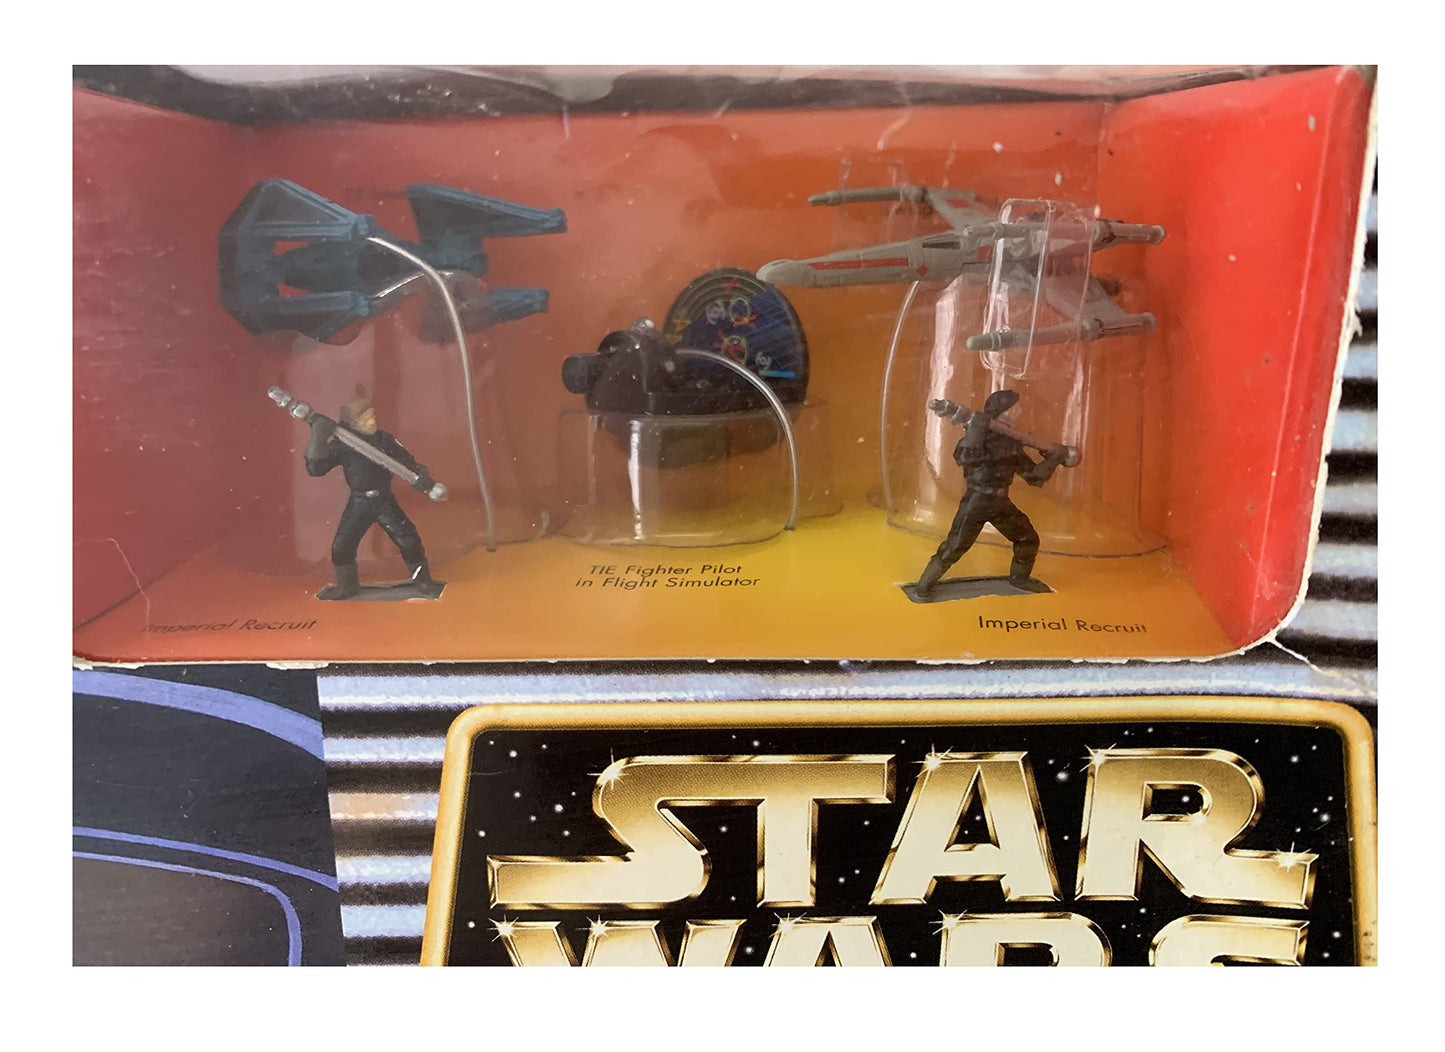 Vintage Star Wars Micro Machines Imperial Tie Fighter Pilot Head / Imperial Academy Training Center Transforming Action Play Set - Brand New Factory Sealed Shop Stock Room Find